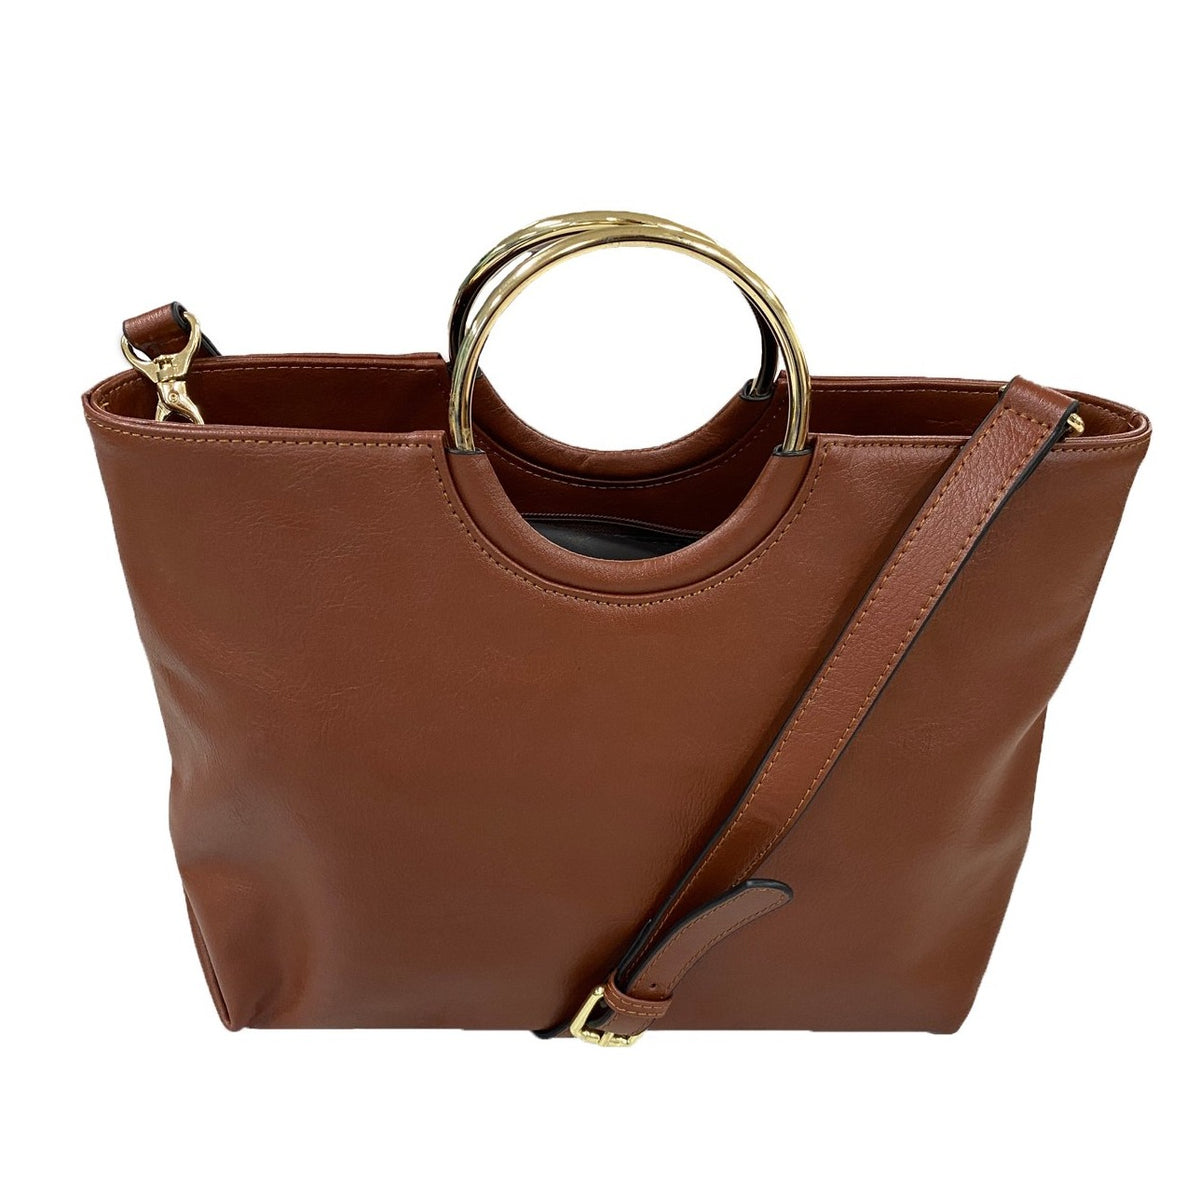 Millfield - Womens Tan Leather Ring Handle Tote Shoulder Crossbody Bag freeshipping - BeltNBags